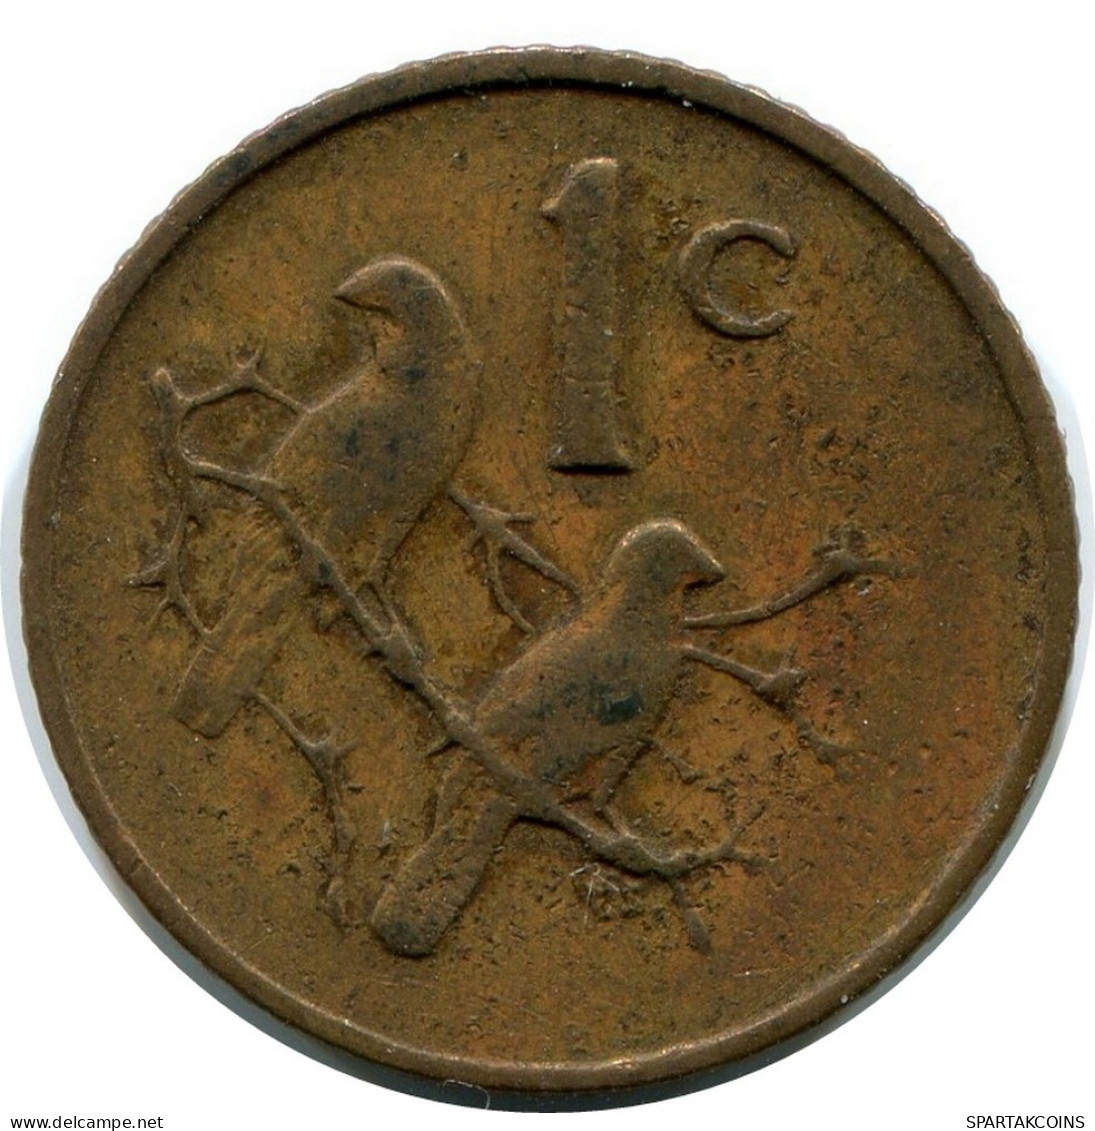 1 CENT 1966 SOUTH AFRICA Coin #AX167.U.A - Sud Africa